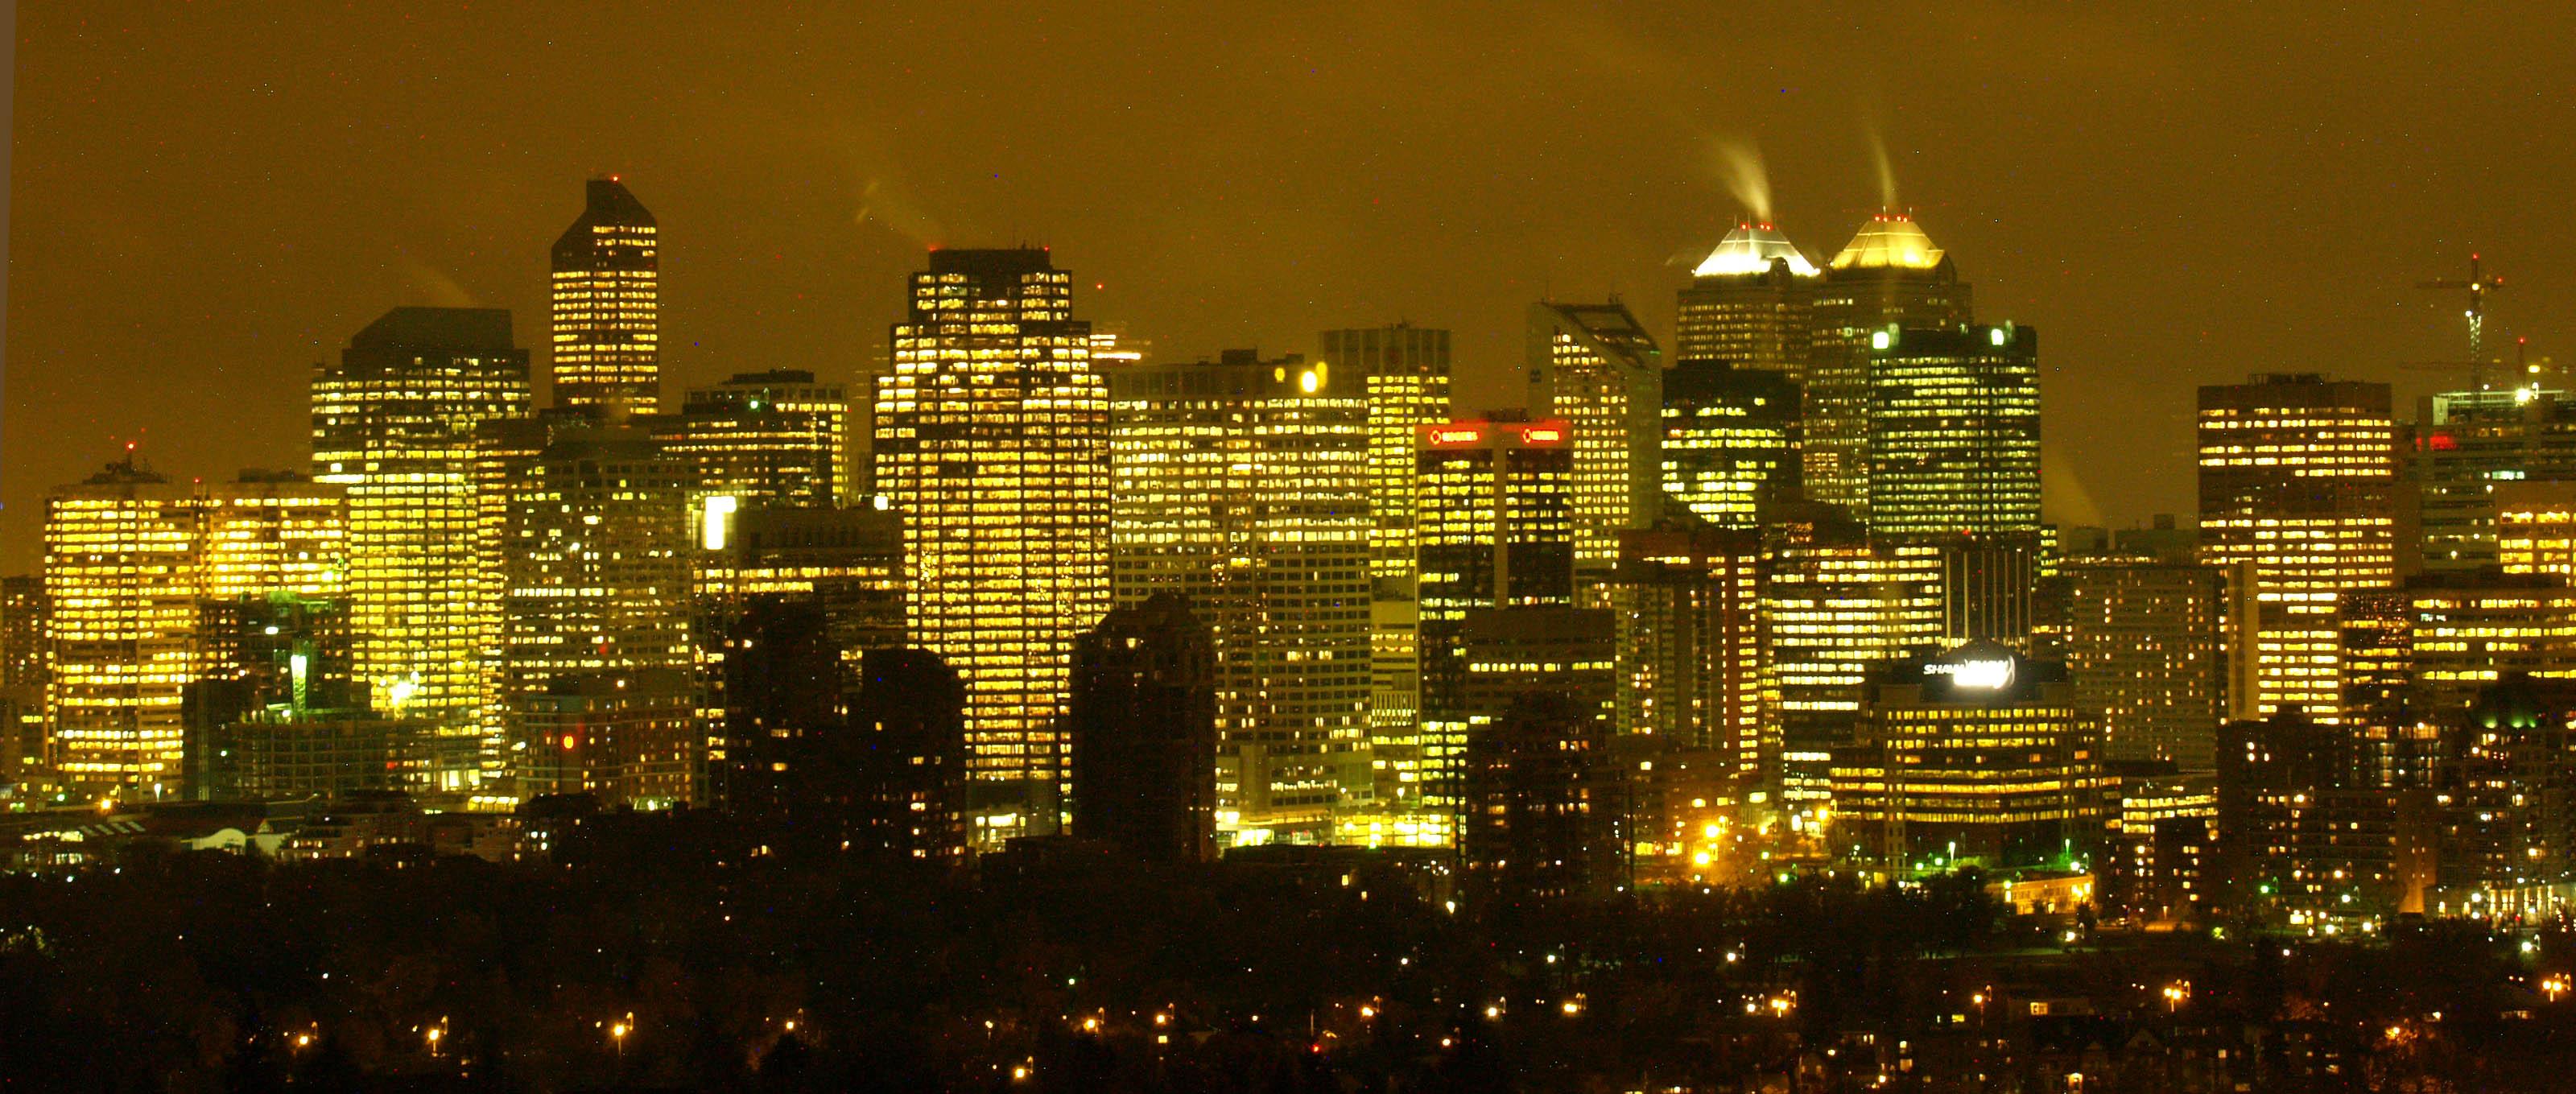 Wallpaper Blink of Calgary Wallpaper HD for Android, Windows